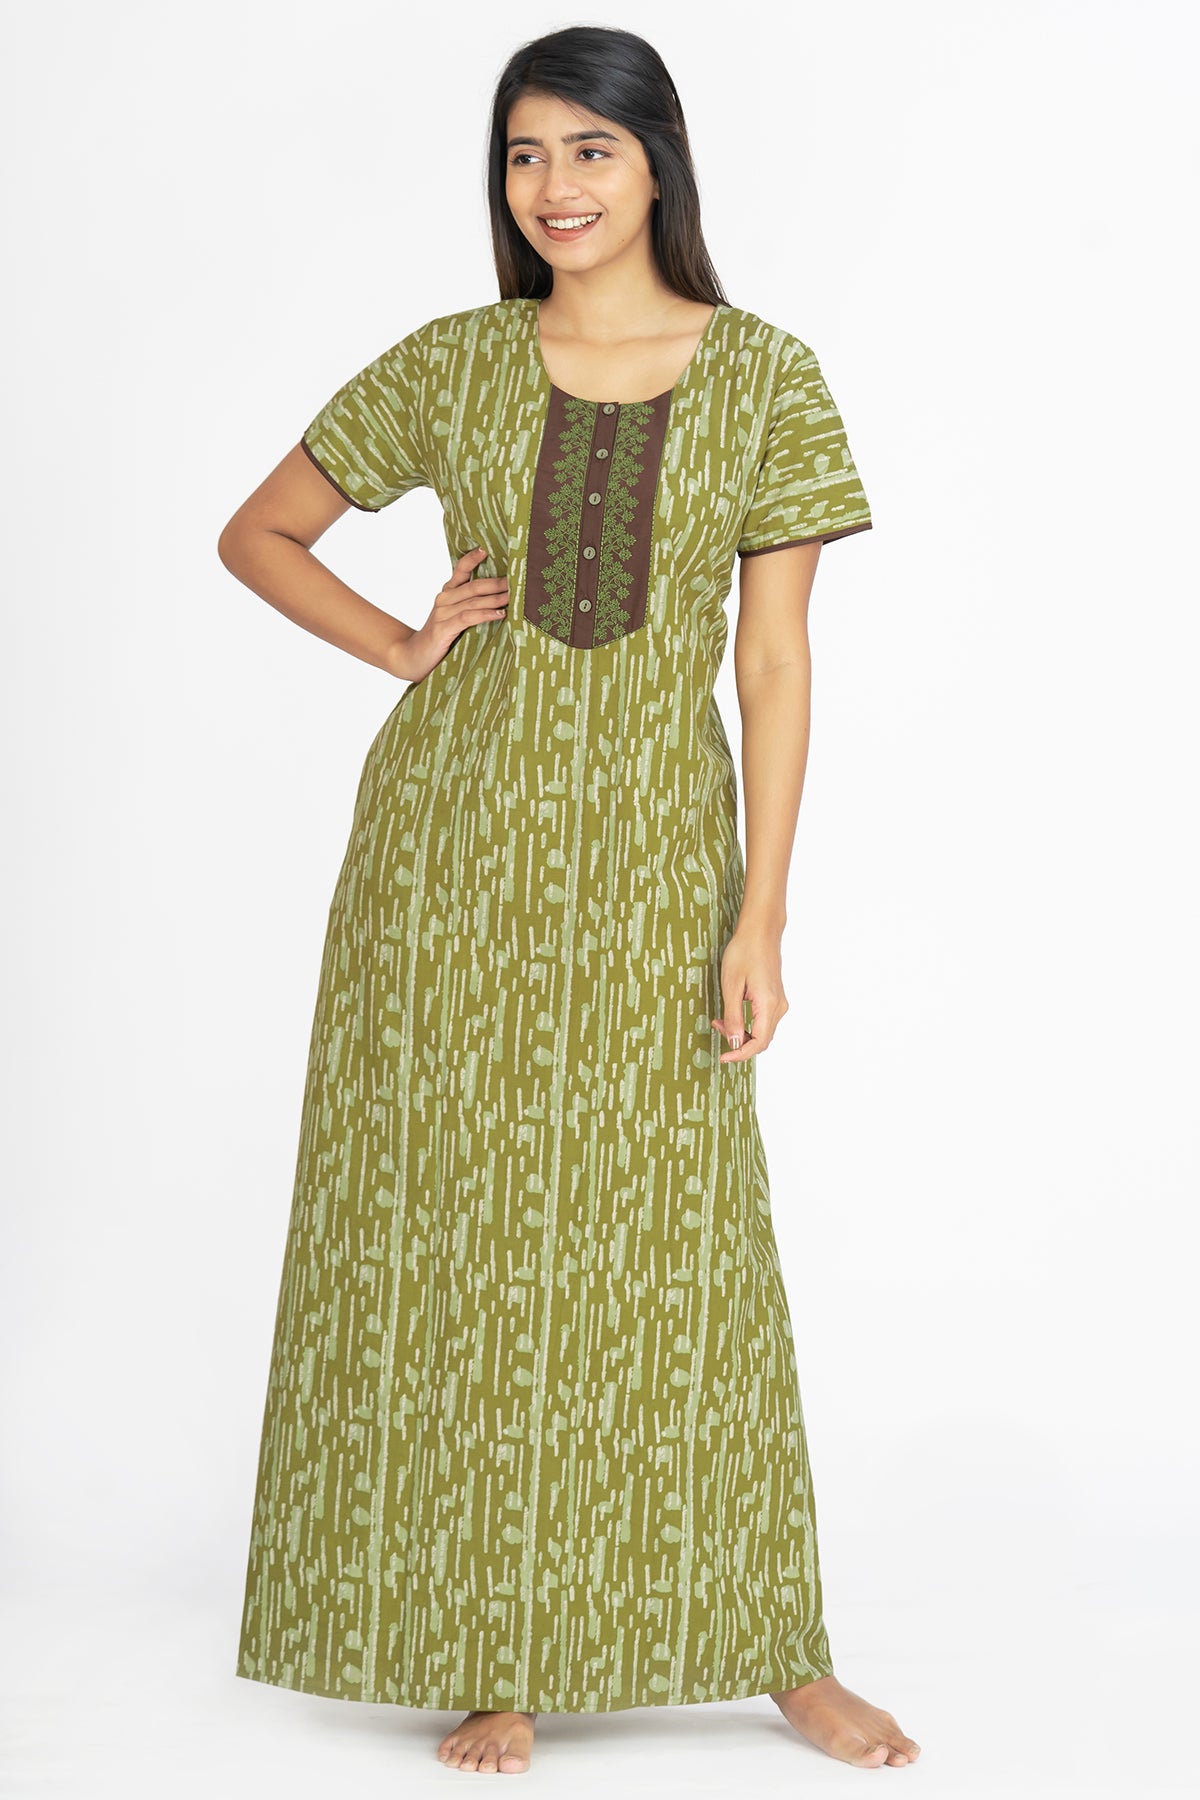 All Over Geometric Printed With Contrast Floral Motif Embroidered Yoke Nighty - Green